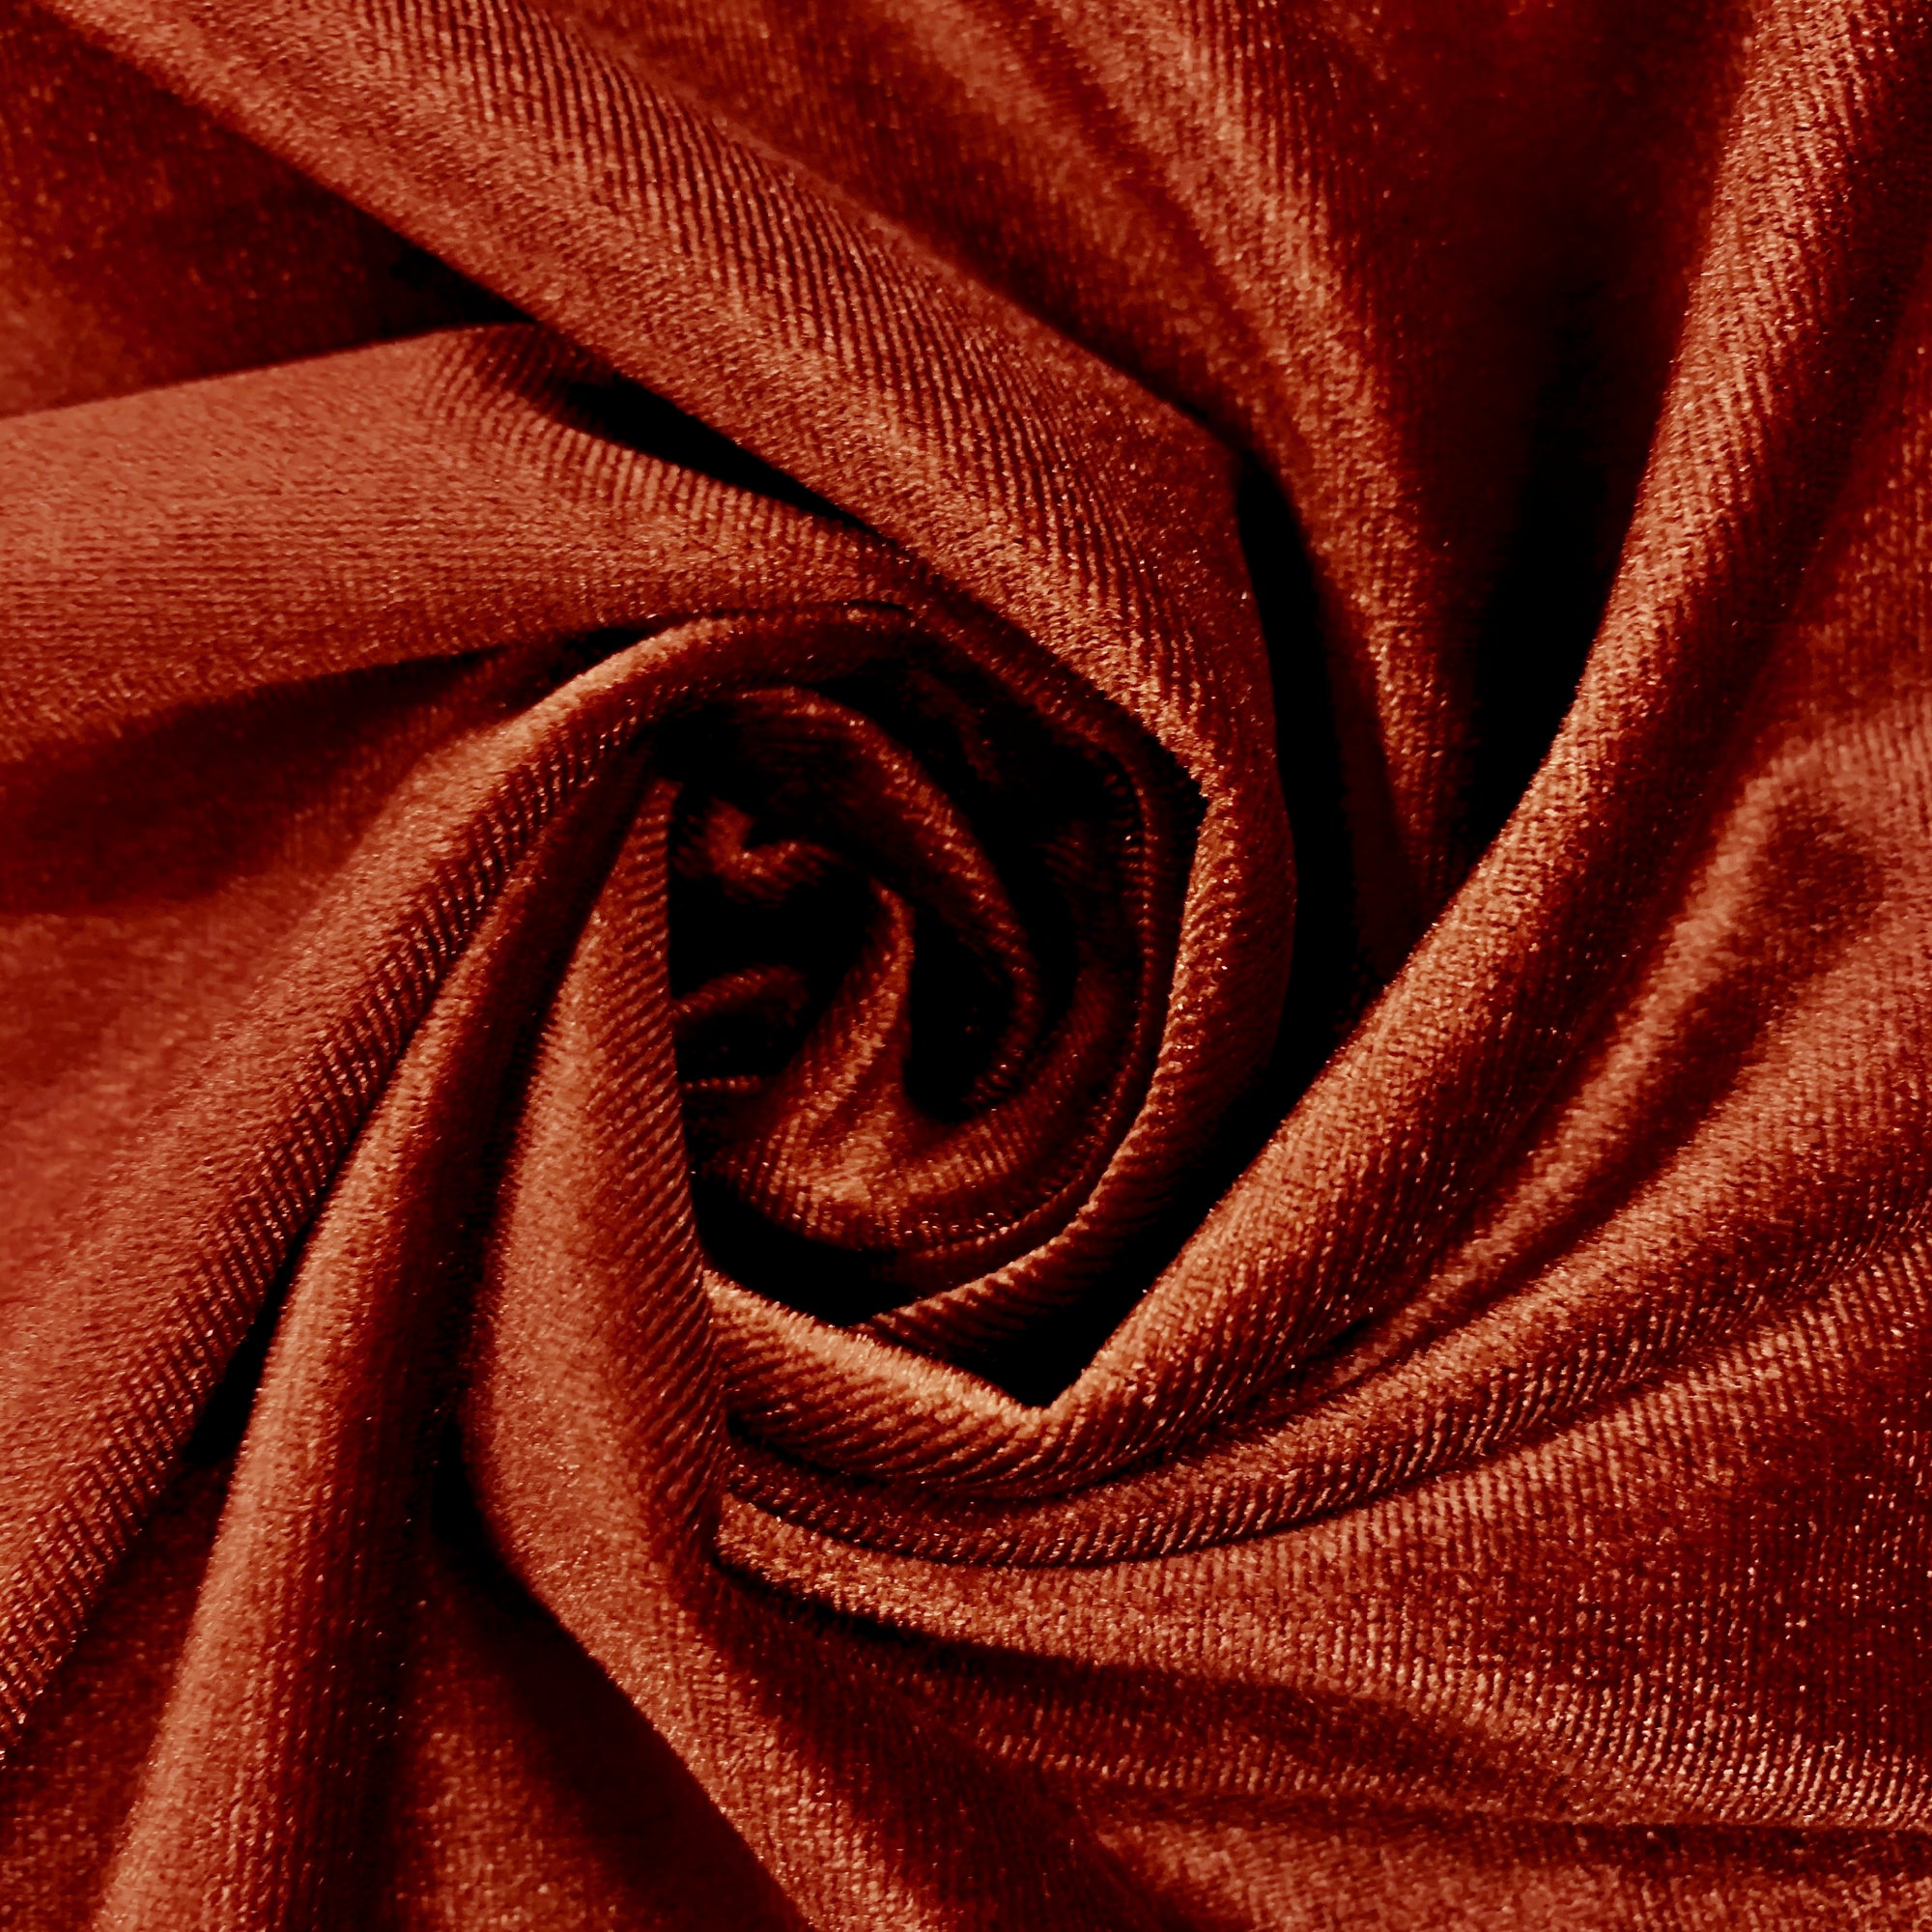 Princess DARK AMBER Polyester Stretch Velvet Fabric for Bows, Top Knots, Head Wraps, Scrunchies, Clothes, Costumes, Crafts